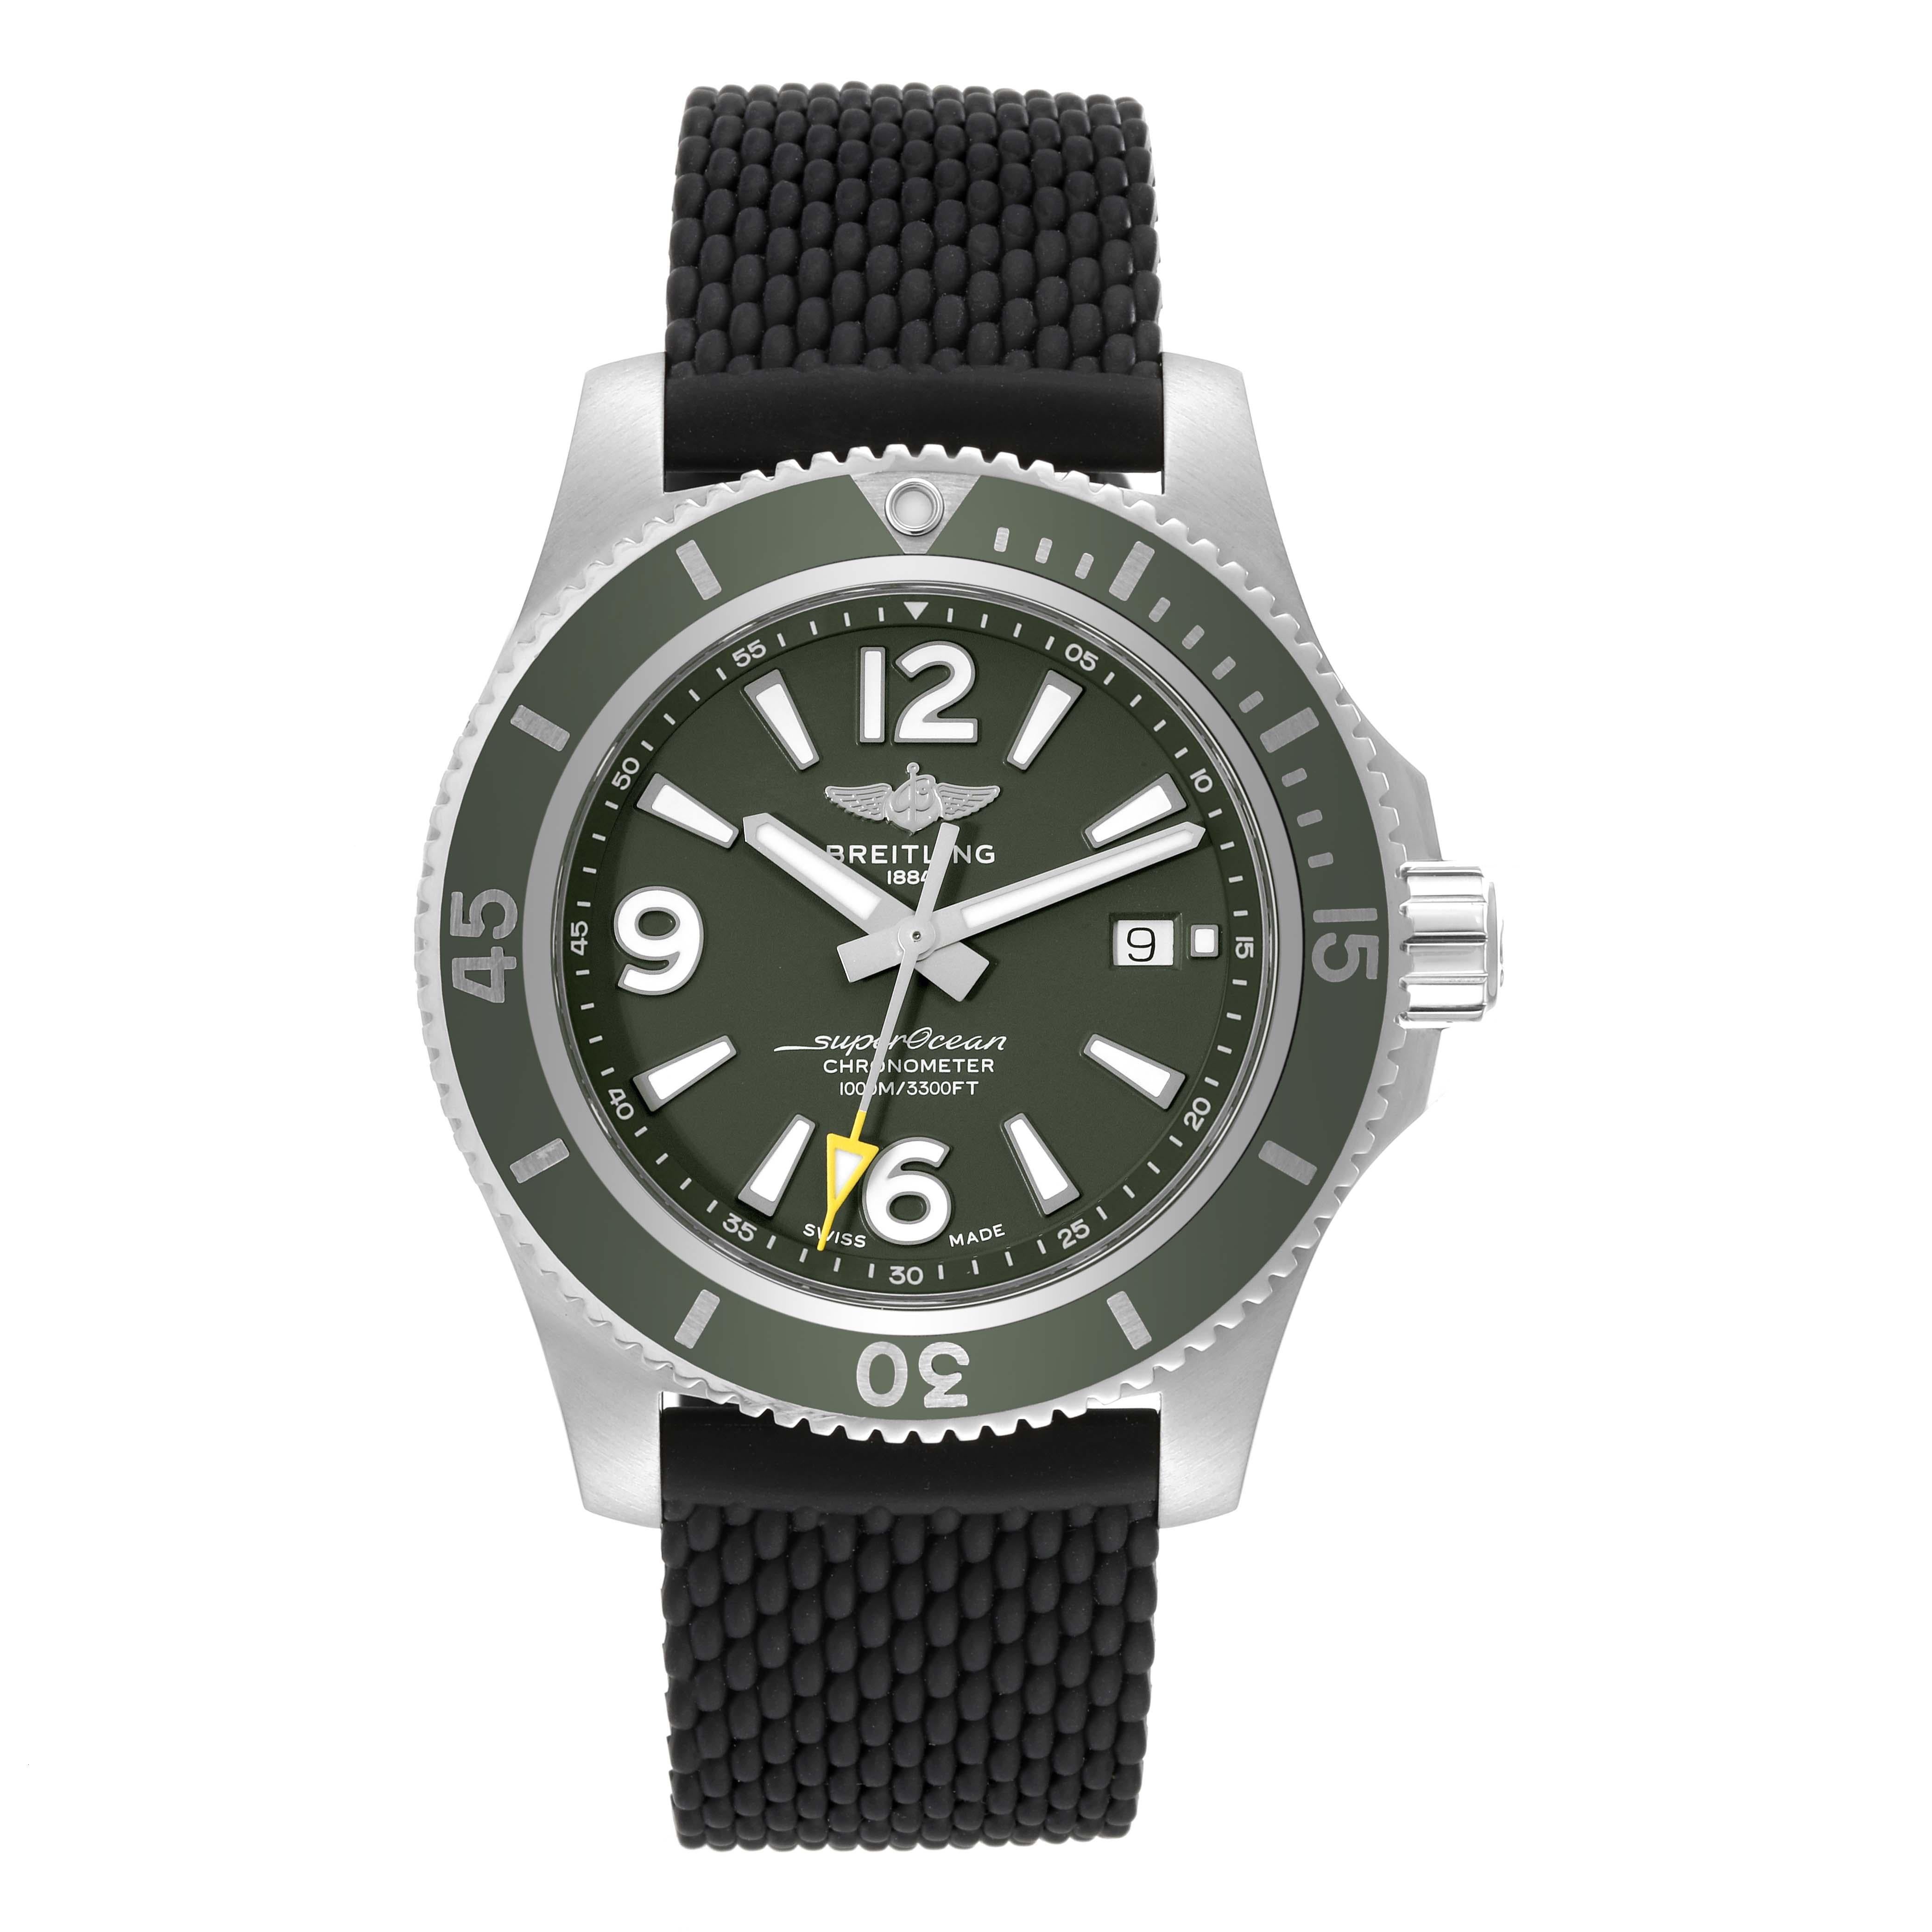 Breitling Superocean 44 Outerknown Green Dial Steel Mens Watch A17367. Automatic self-winding movement. Stainless steel case 44 mm in diameter with screwed-down crown. Outerknown logo engraved on caseback, commemorating their collaboration with